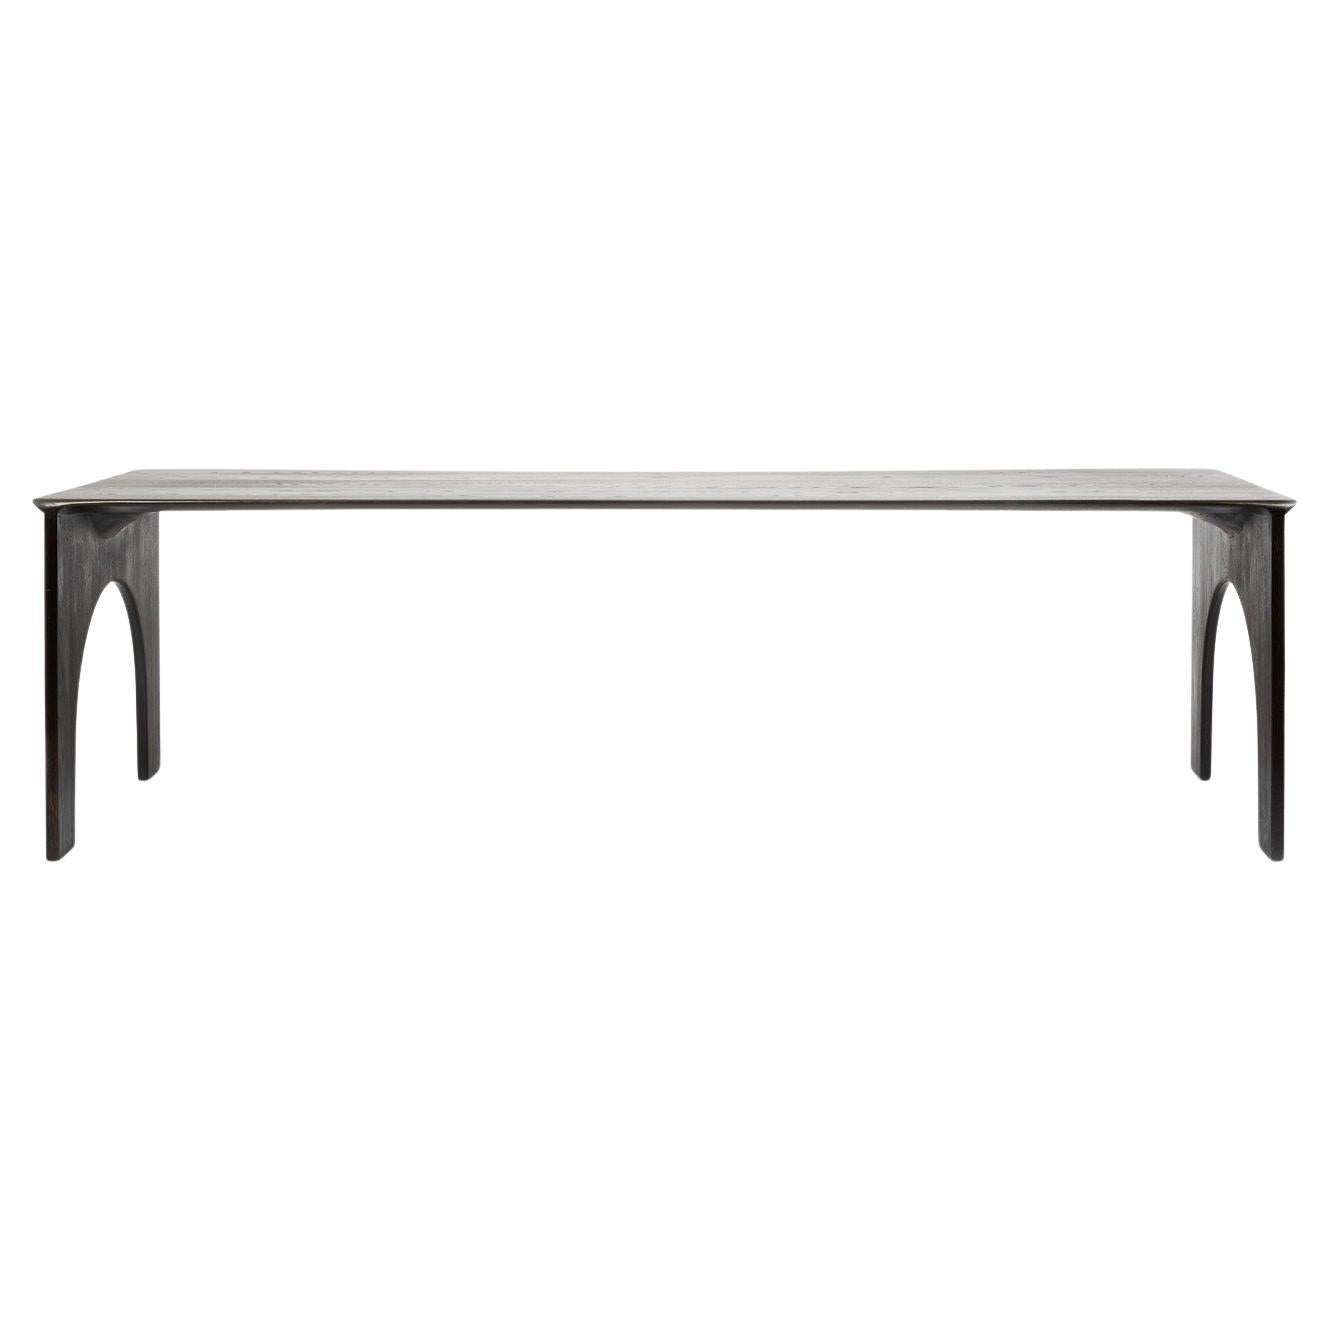 Kuro Dining Table by Studio Lukas Cober For Sale